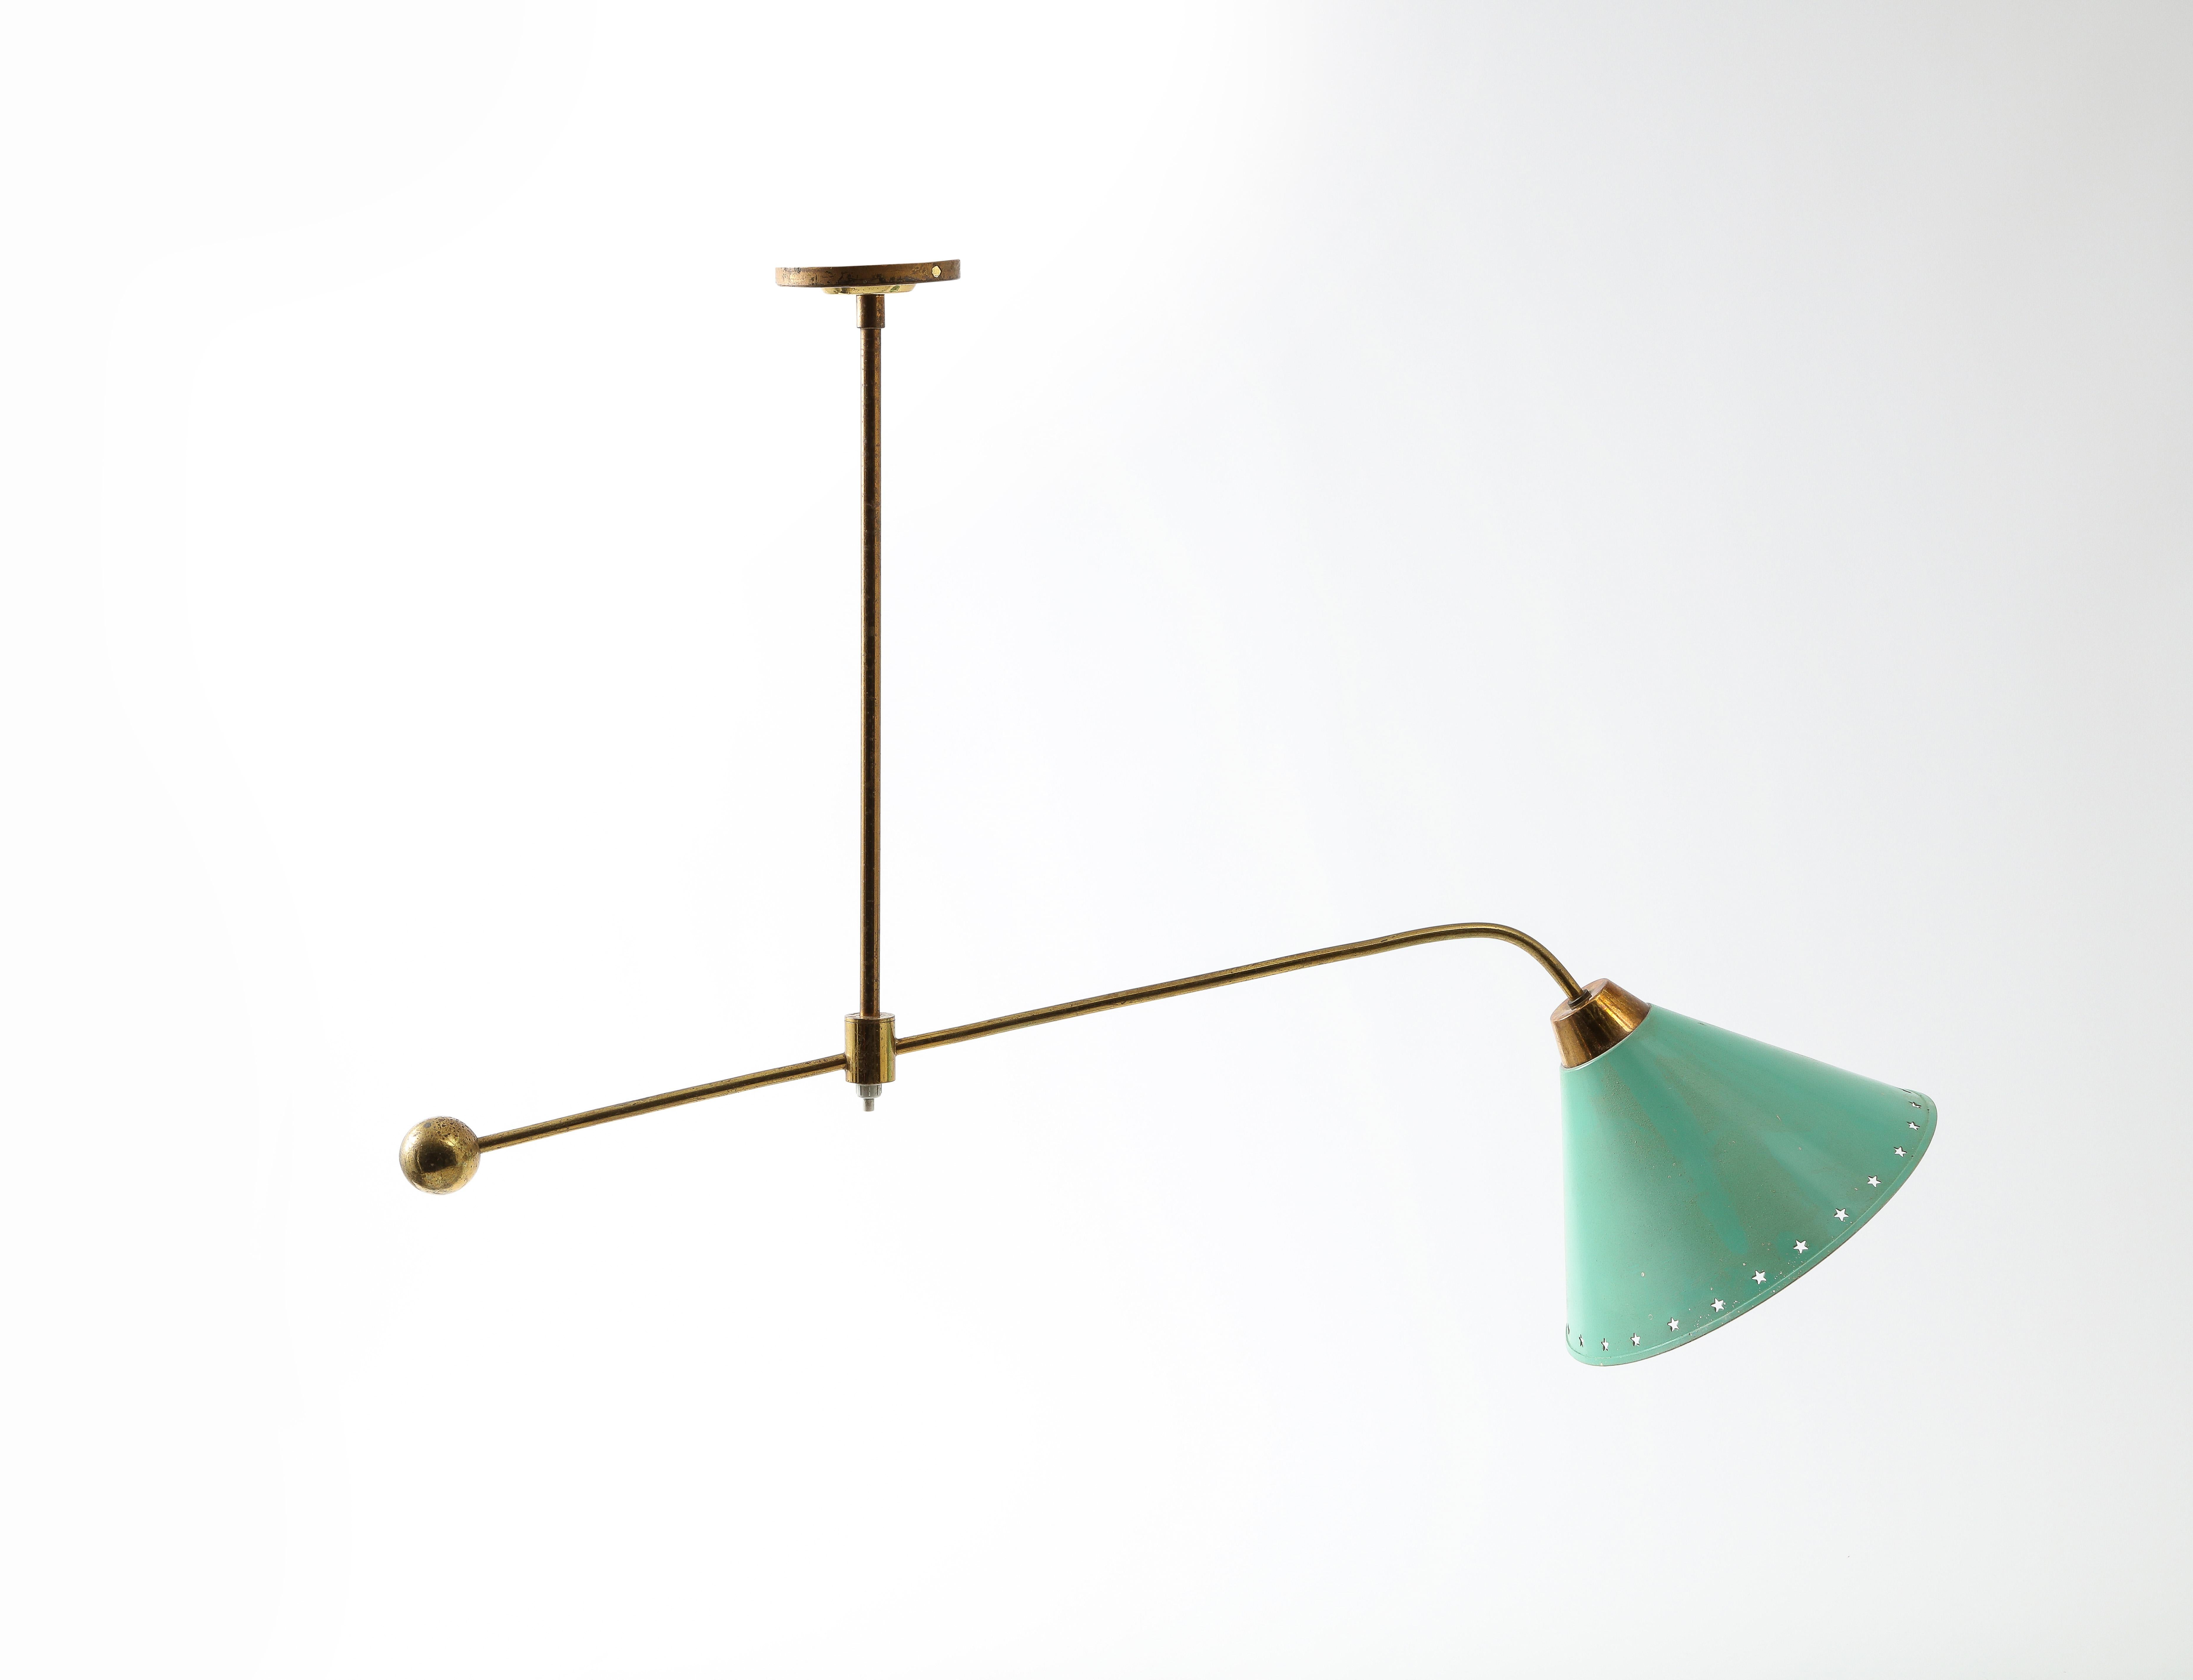 20th Century Arlus Brass Asymmetrical Ceiling Fixture with Green Shade, France 1960's For Sale